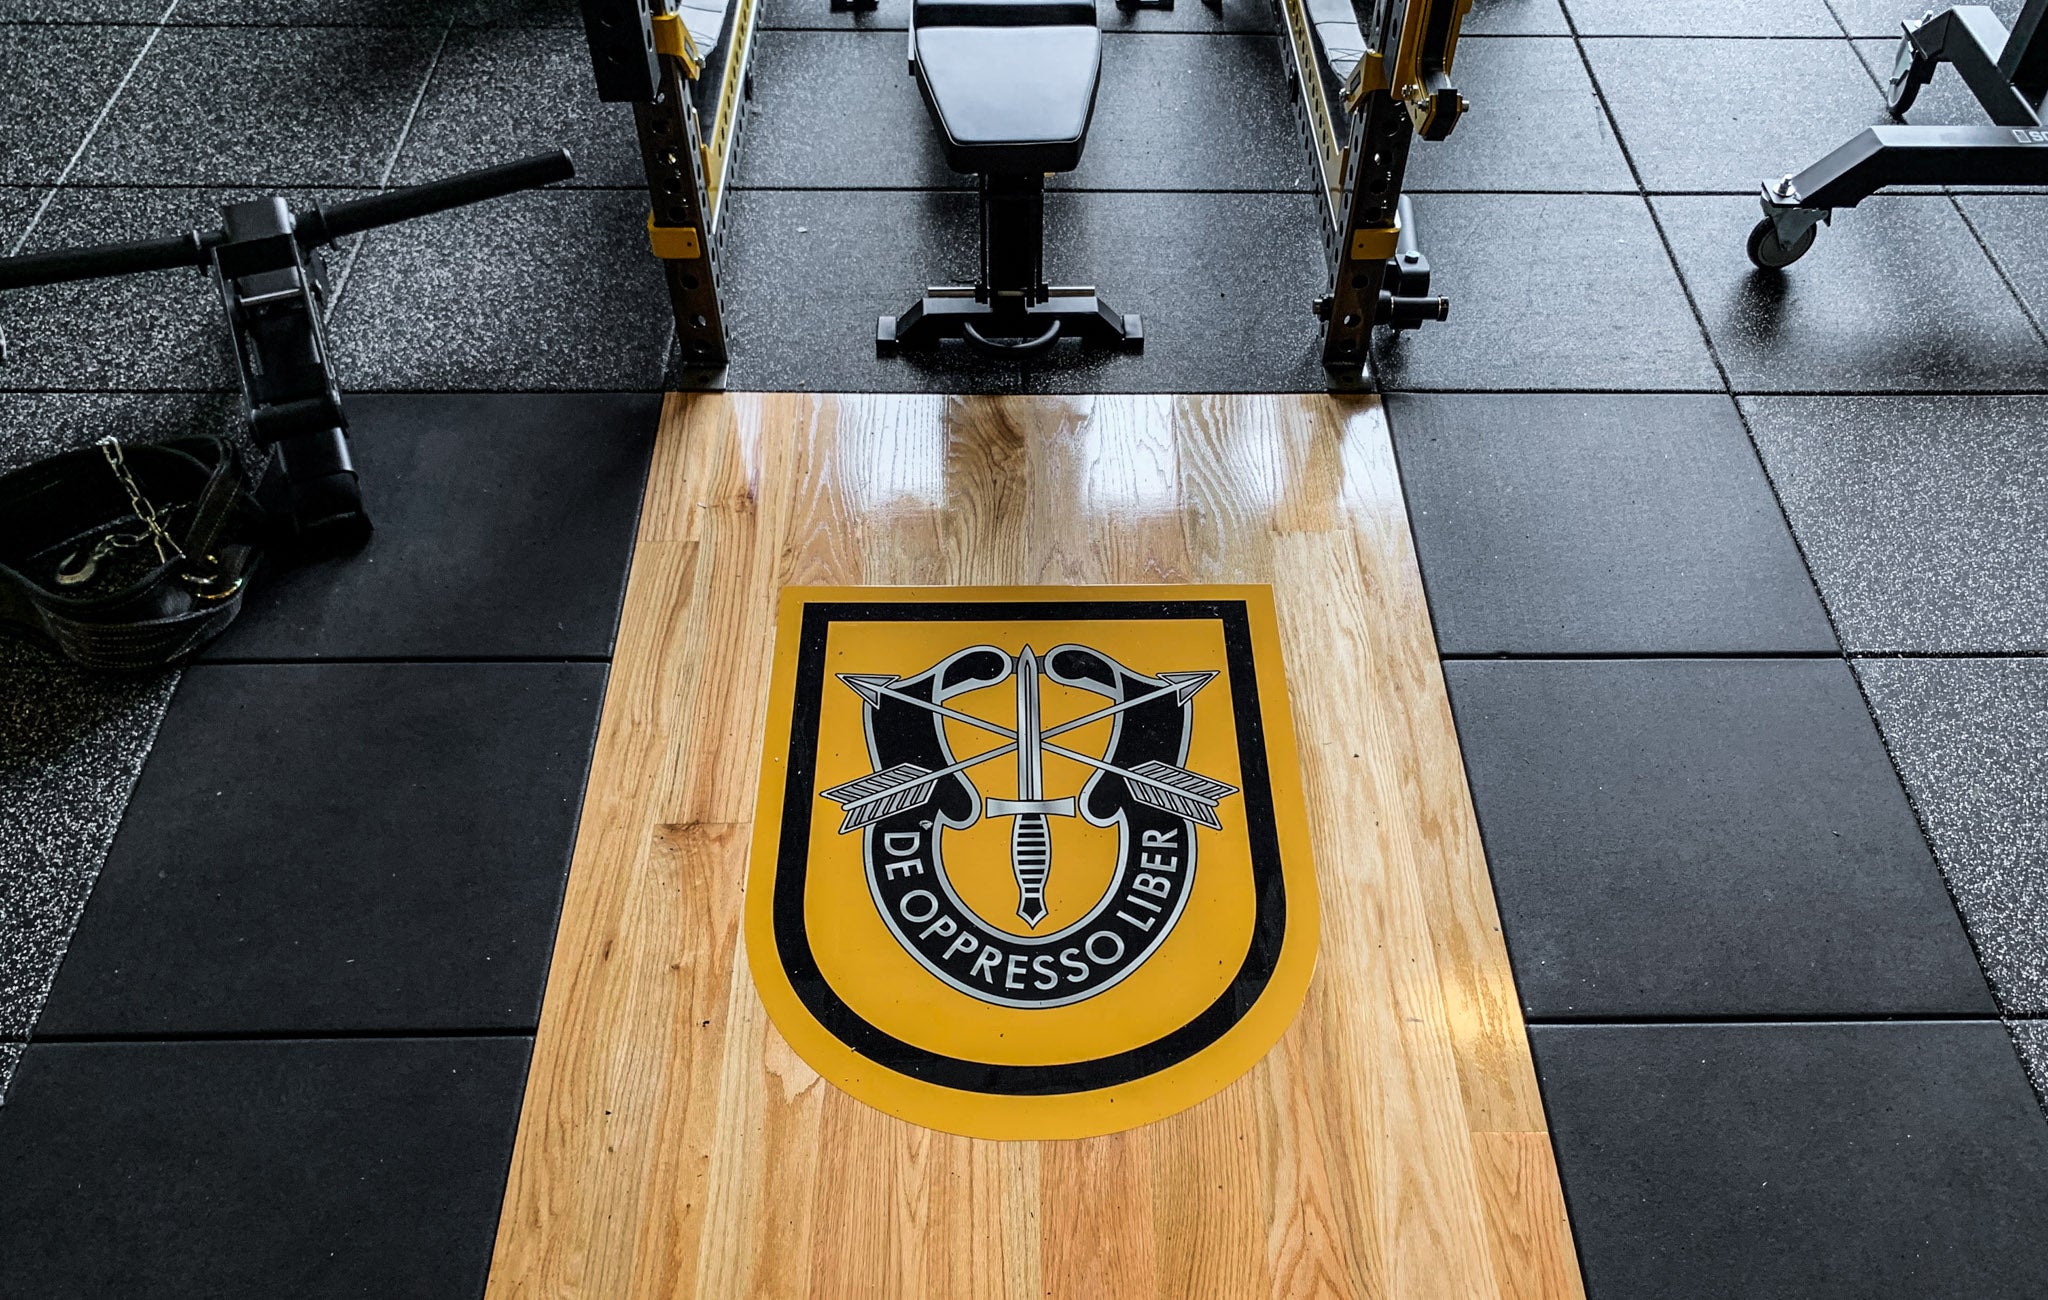 Sorinex Military Weight Rooms